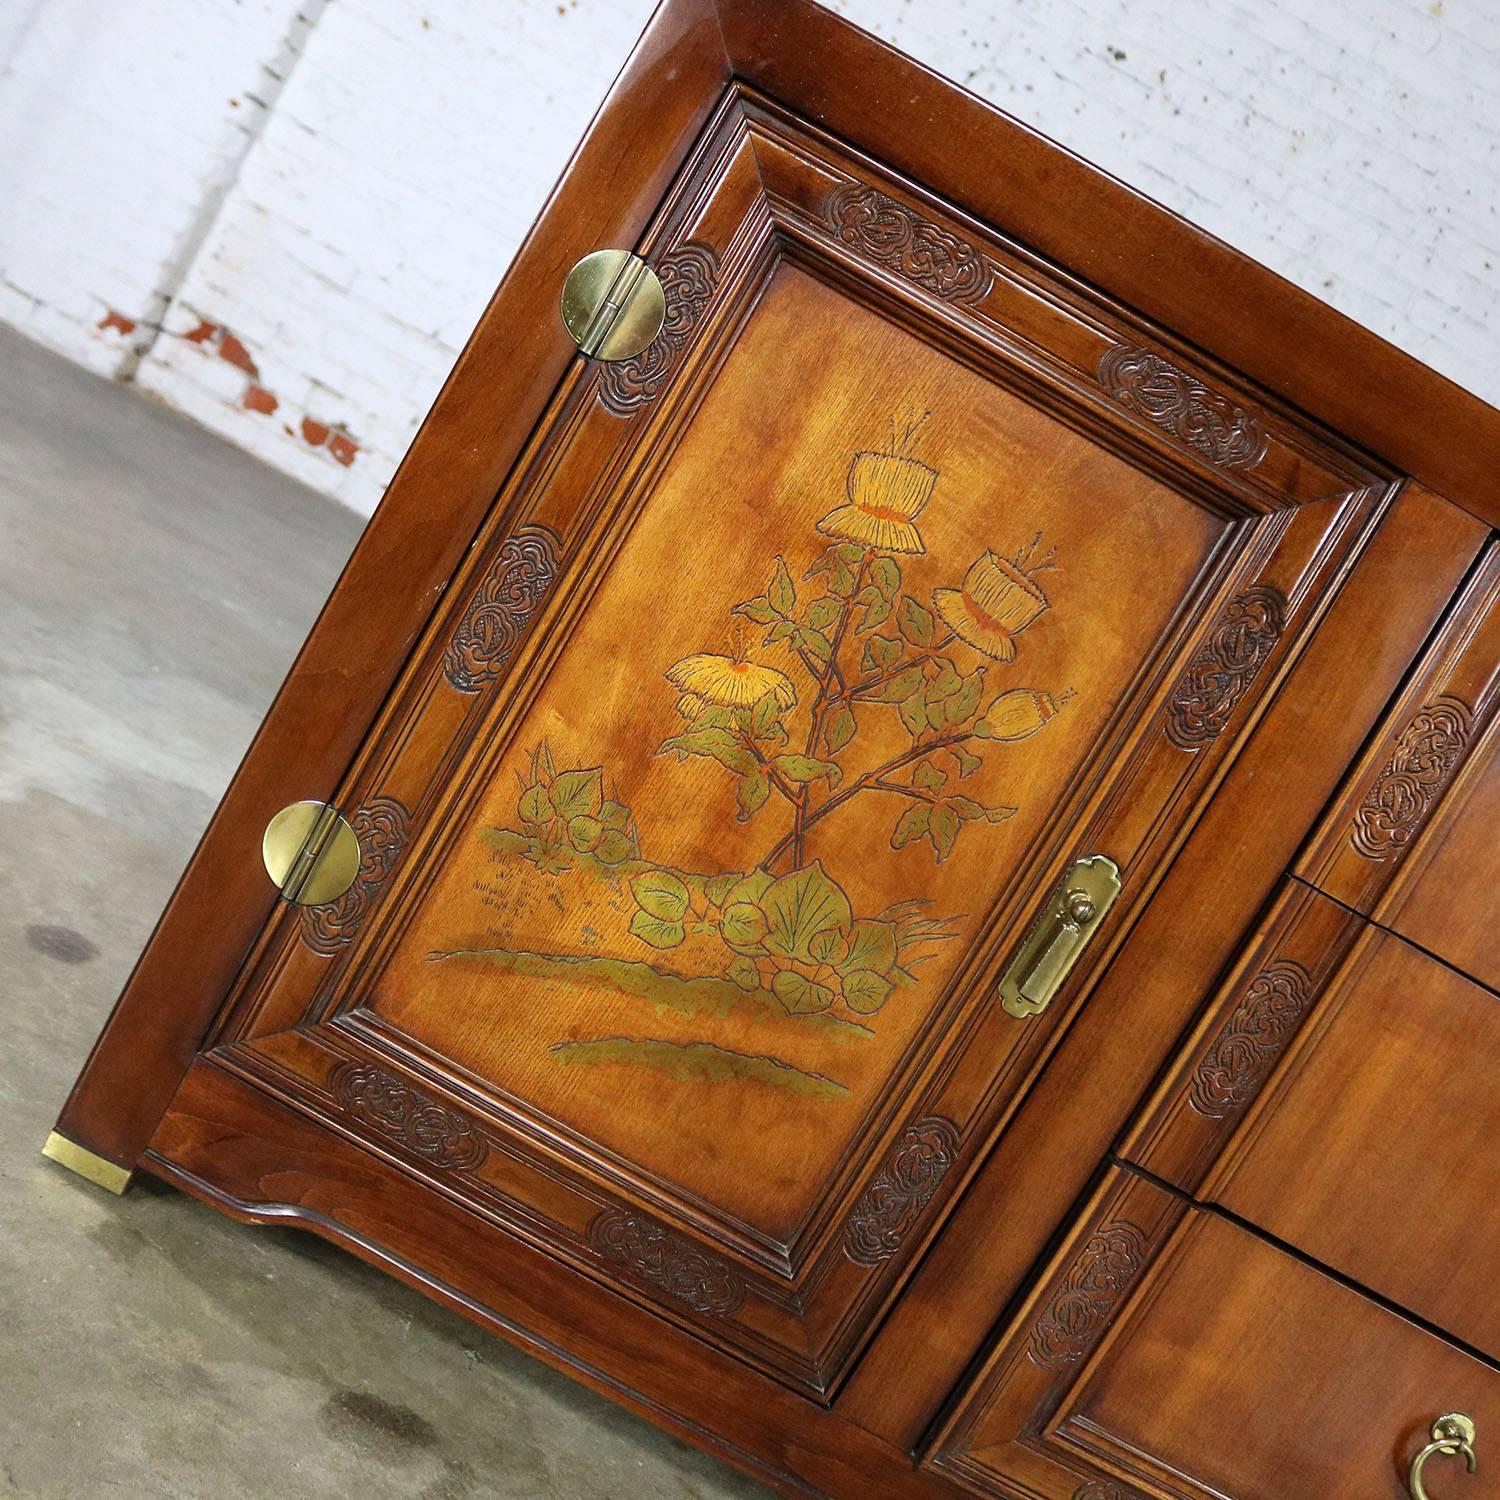 Beautiful Asian inspired credenza, buffet or chest of drawers from Bernhardt Furniture’s Flair Division’s Shibui Collection, circa 1970s–1980s this piece is in wonderful vintage condition. There are some small pinholes in the finish on the righthand